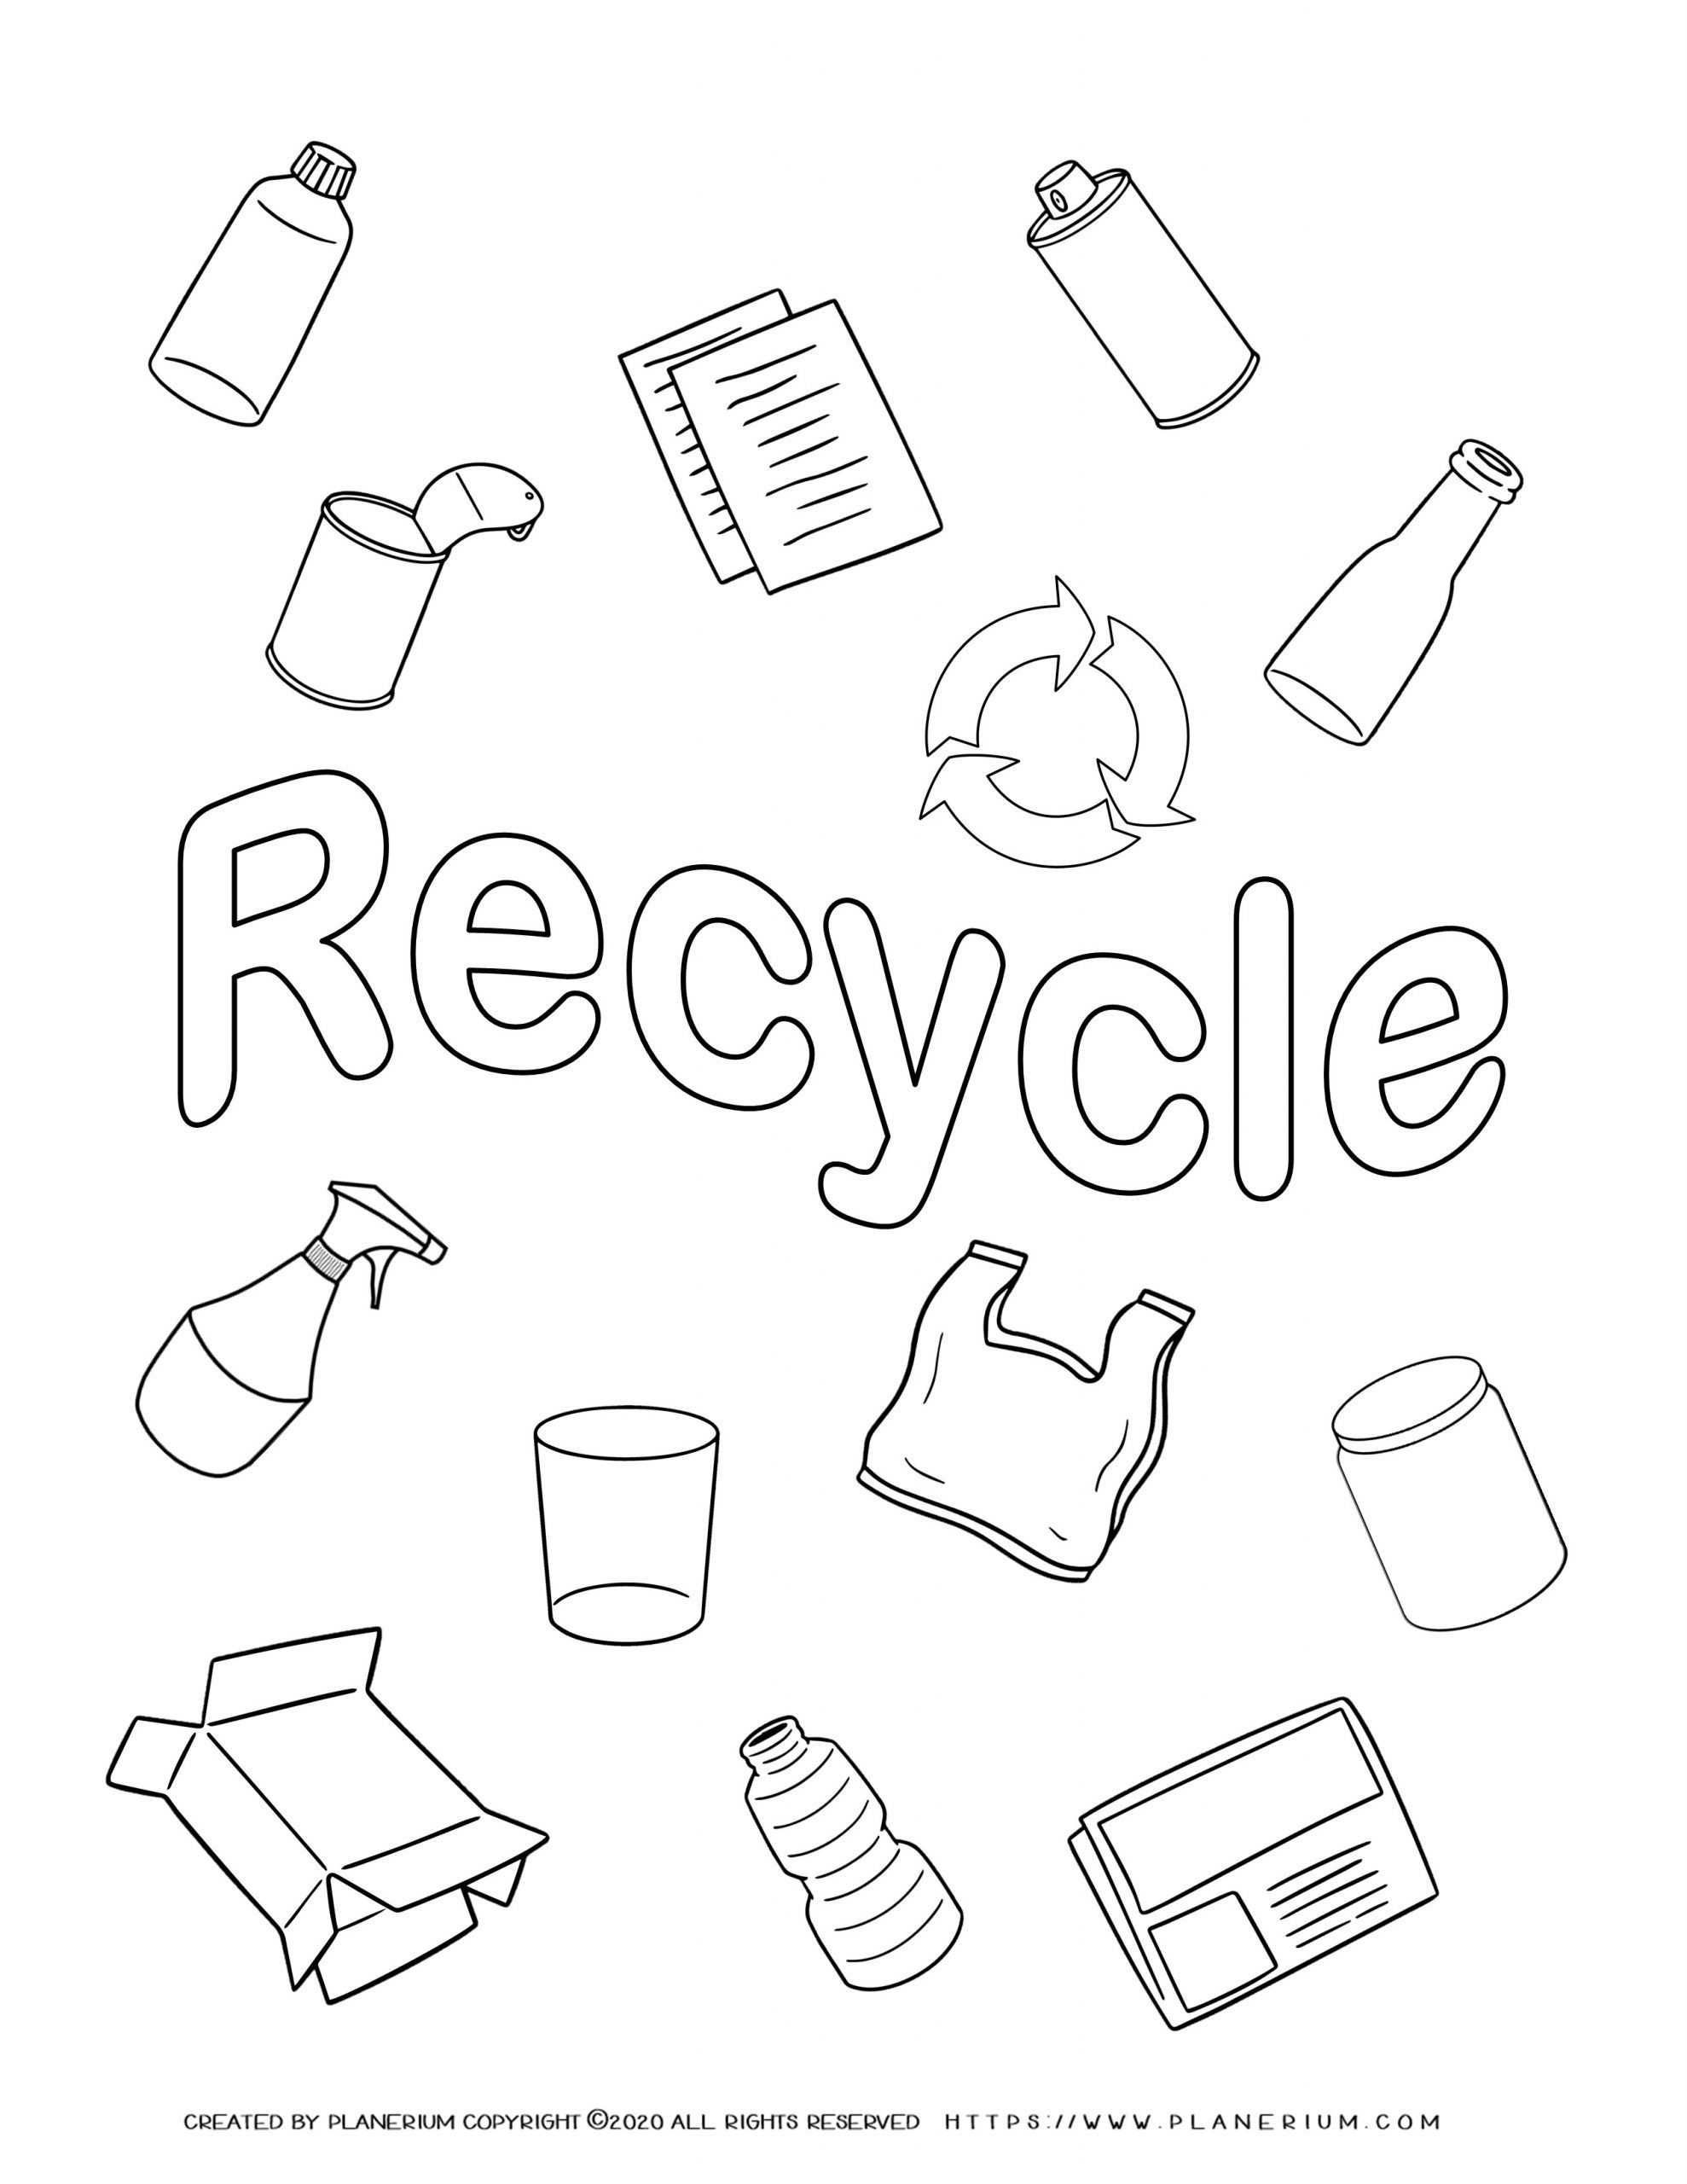 Earth Day - Coloring Page - Recycled items | Planerium